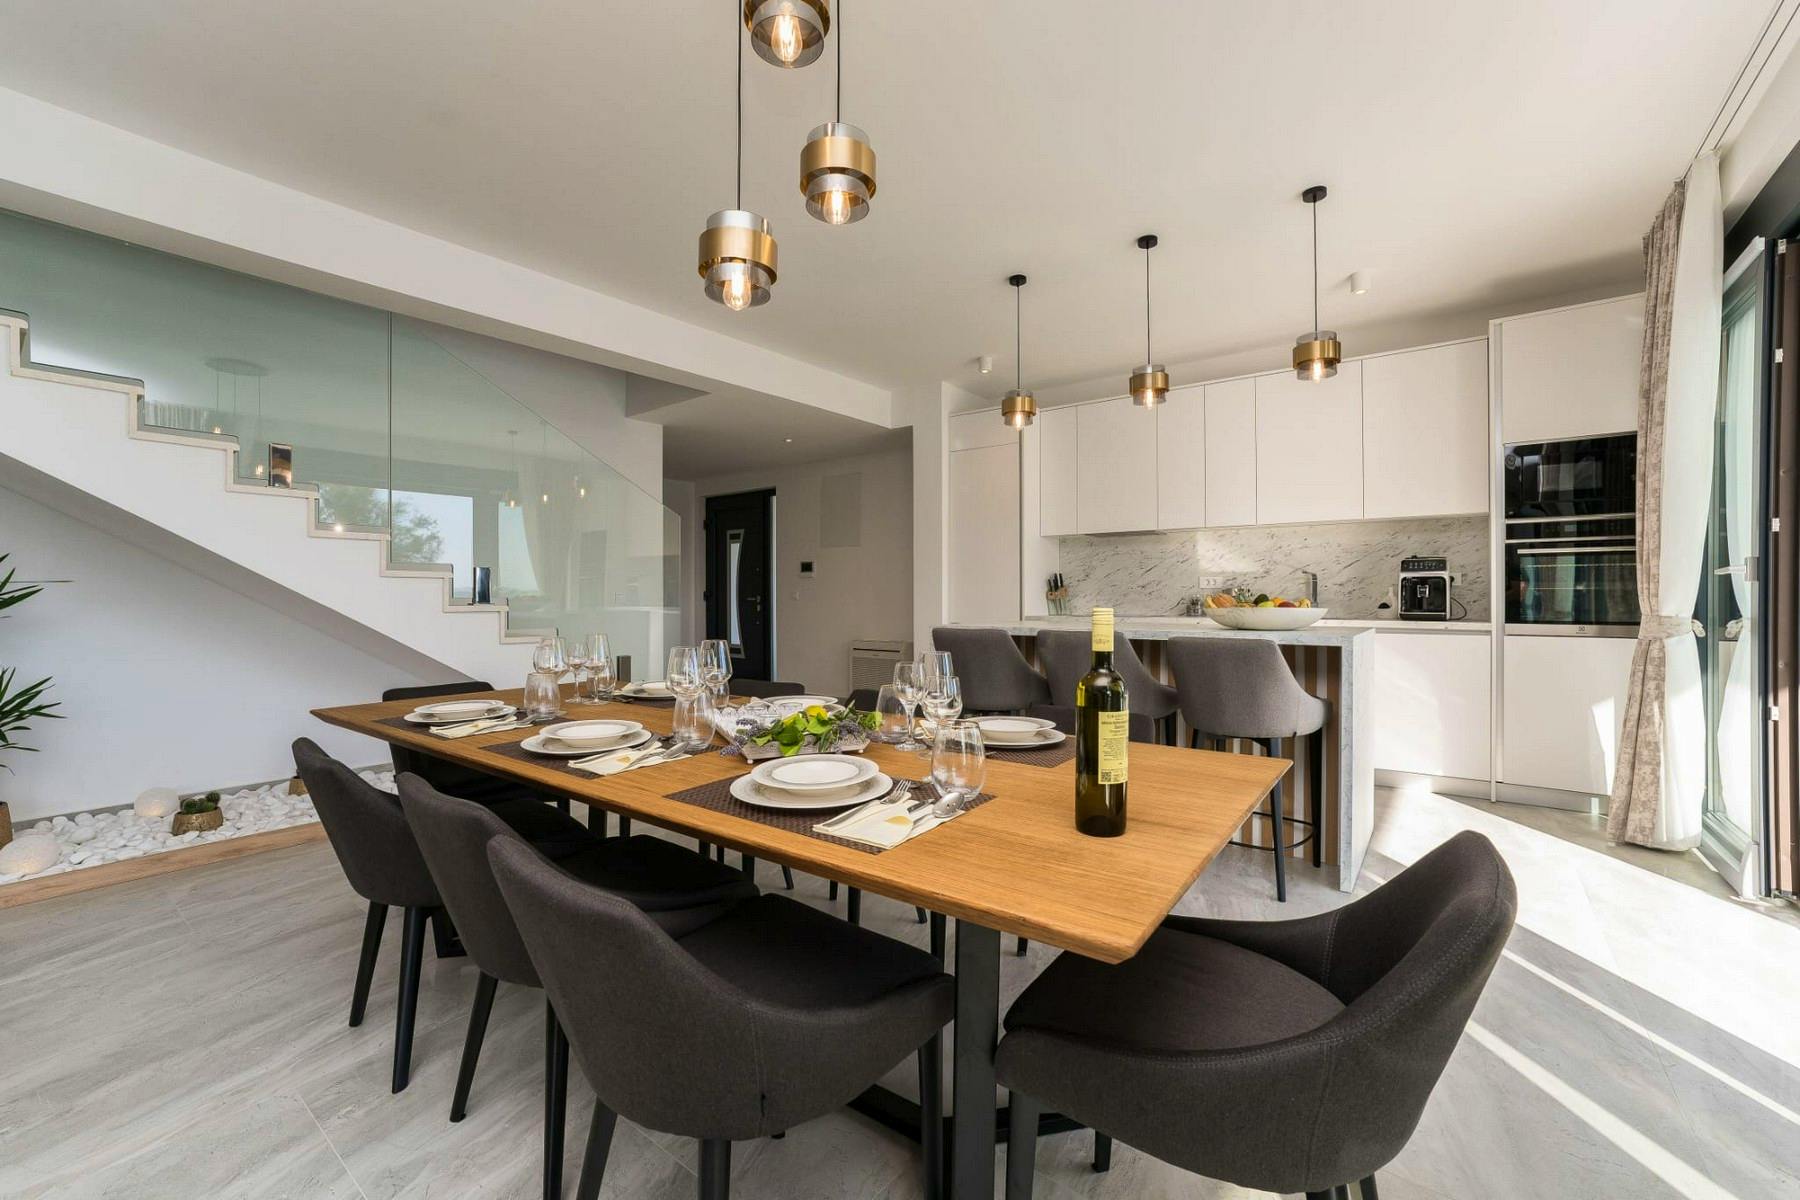 Fully fitted kitchen and elegant dining area